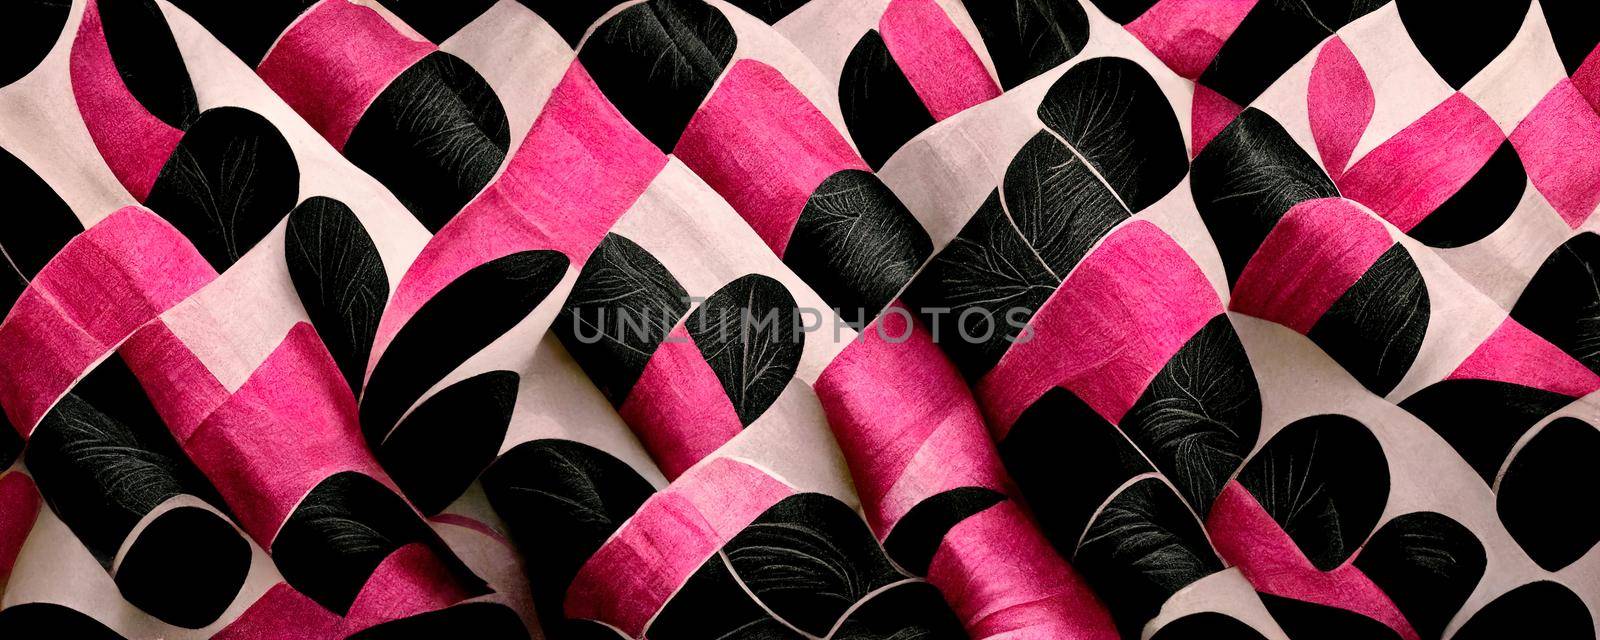 black and pink pleated fabric, Colorful abstract wallpaper texture background illustration by TRMK